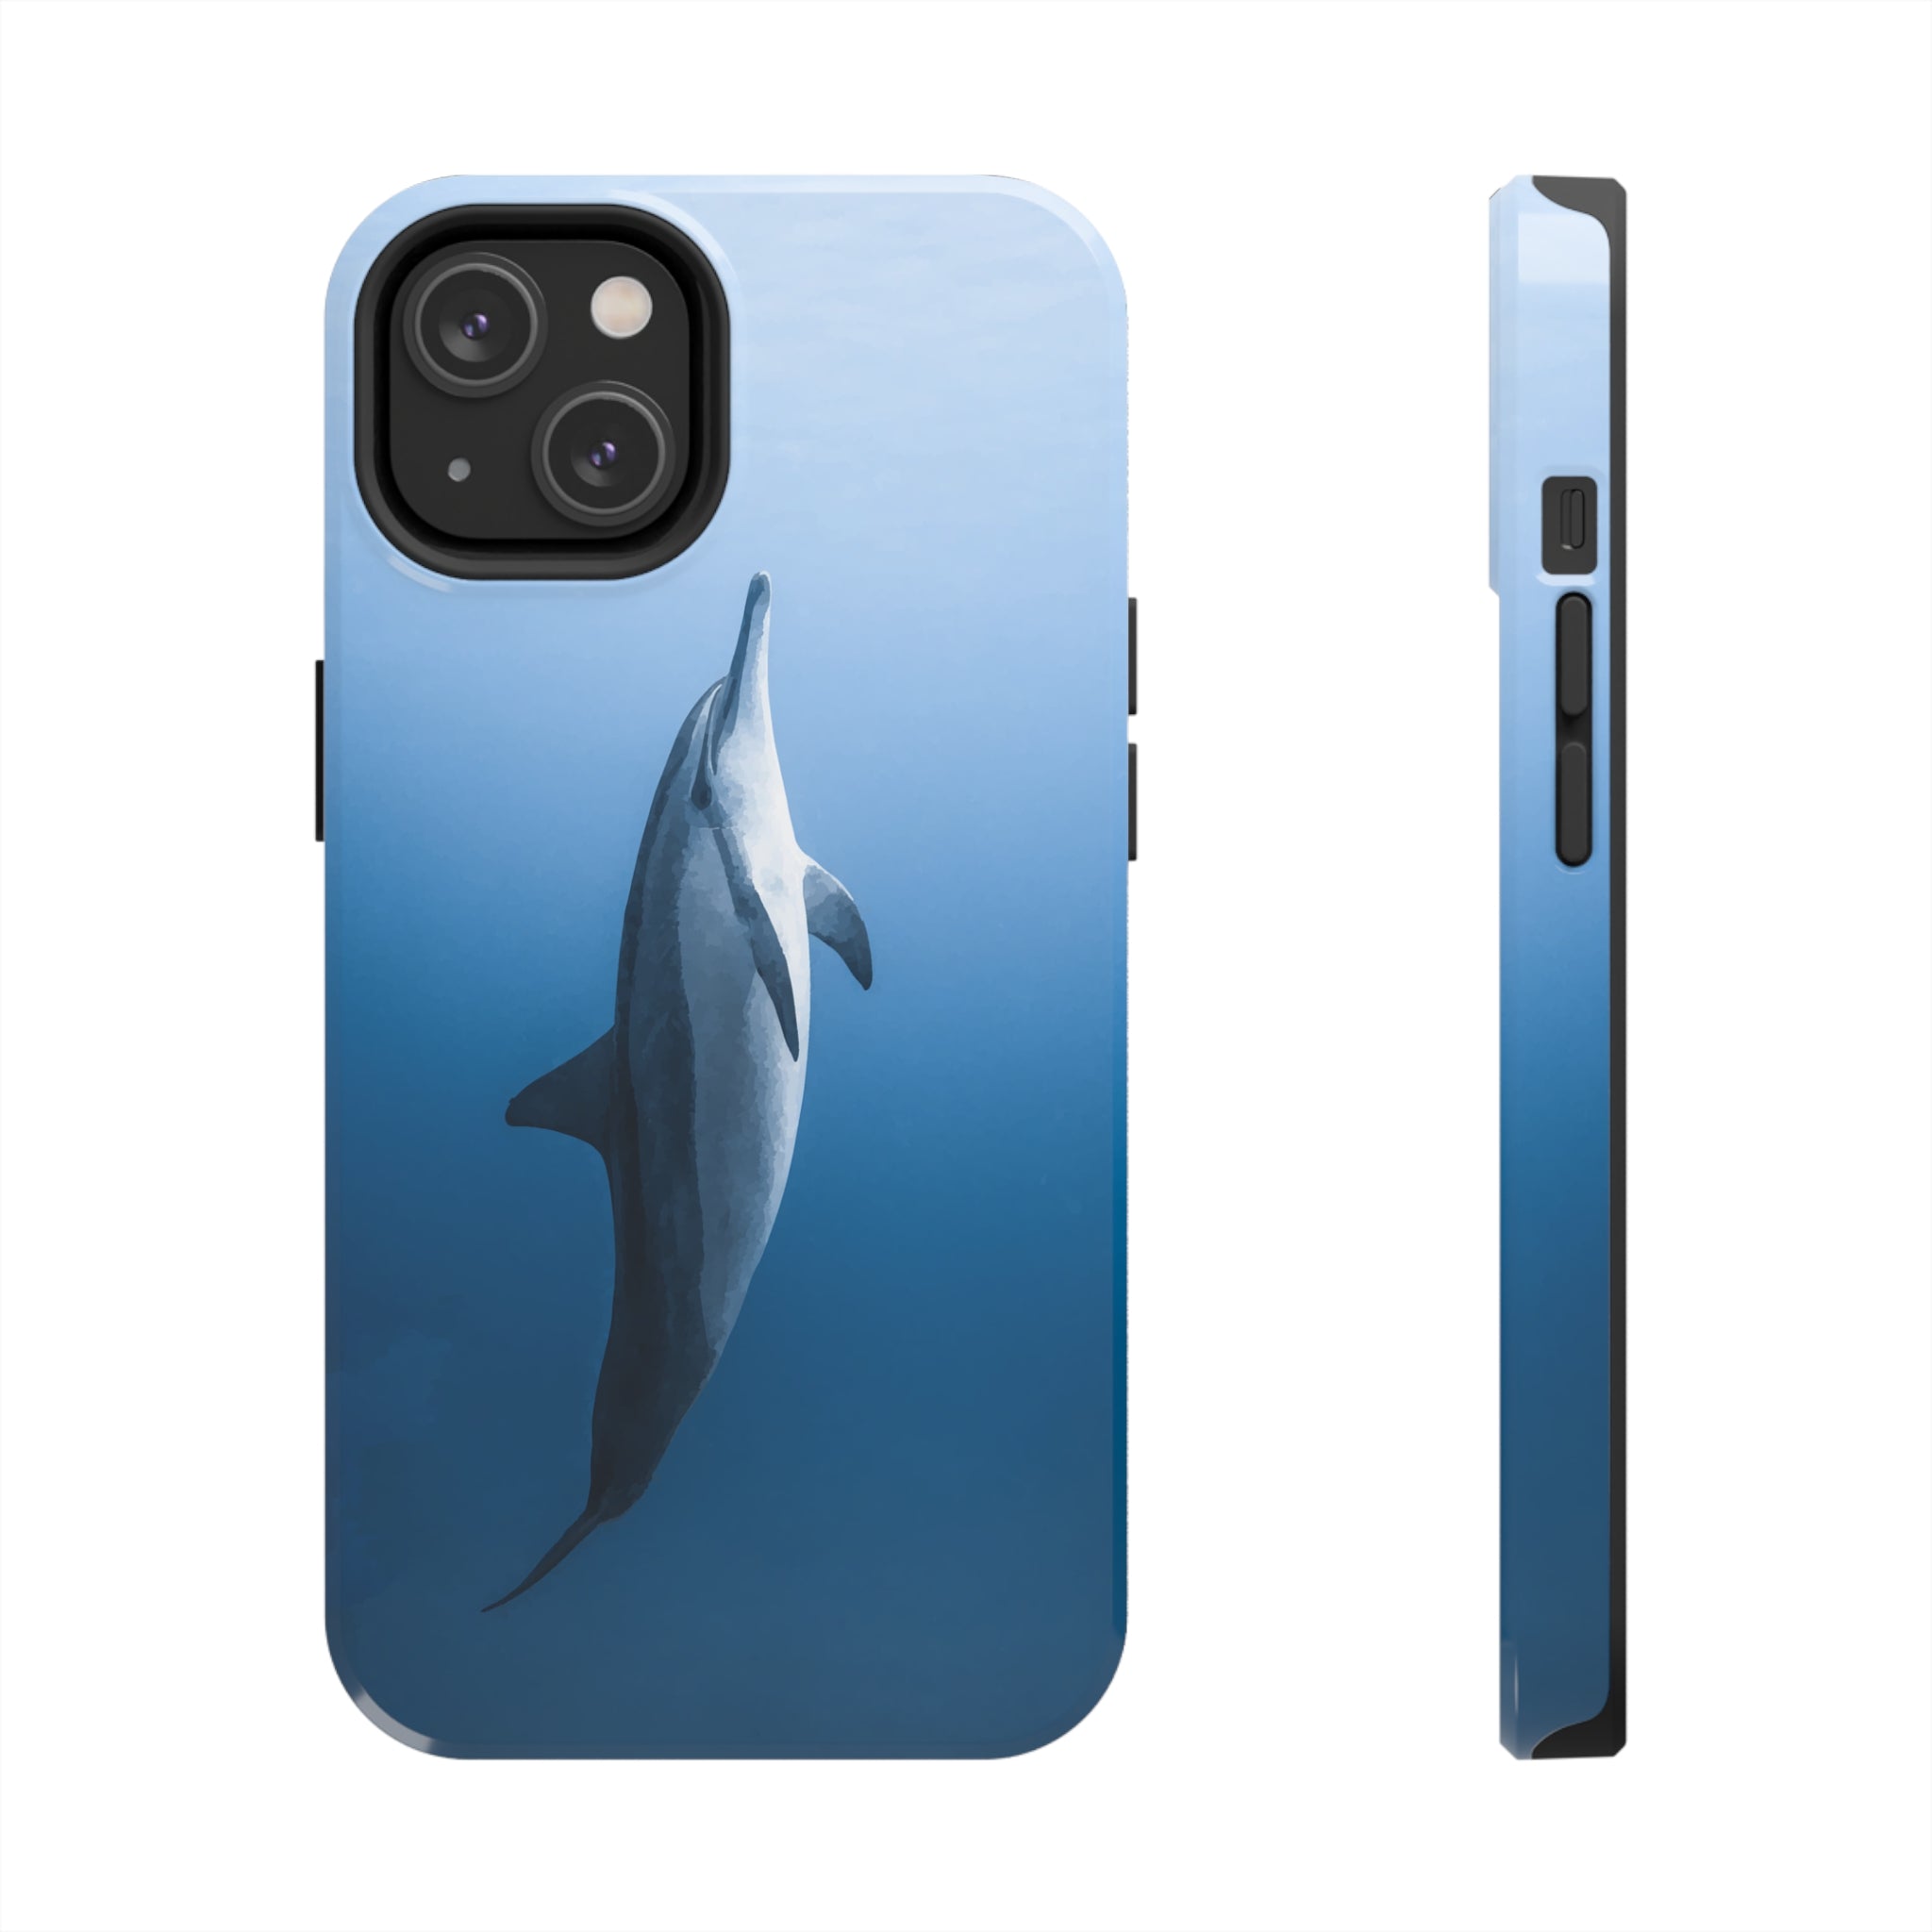 Main image of Dolphin iPhone Case